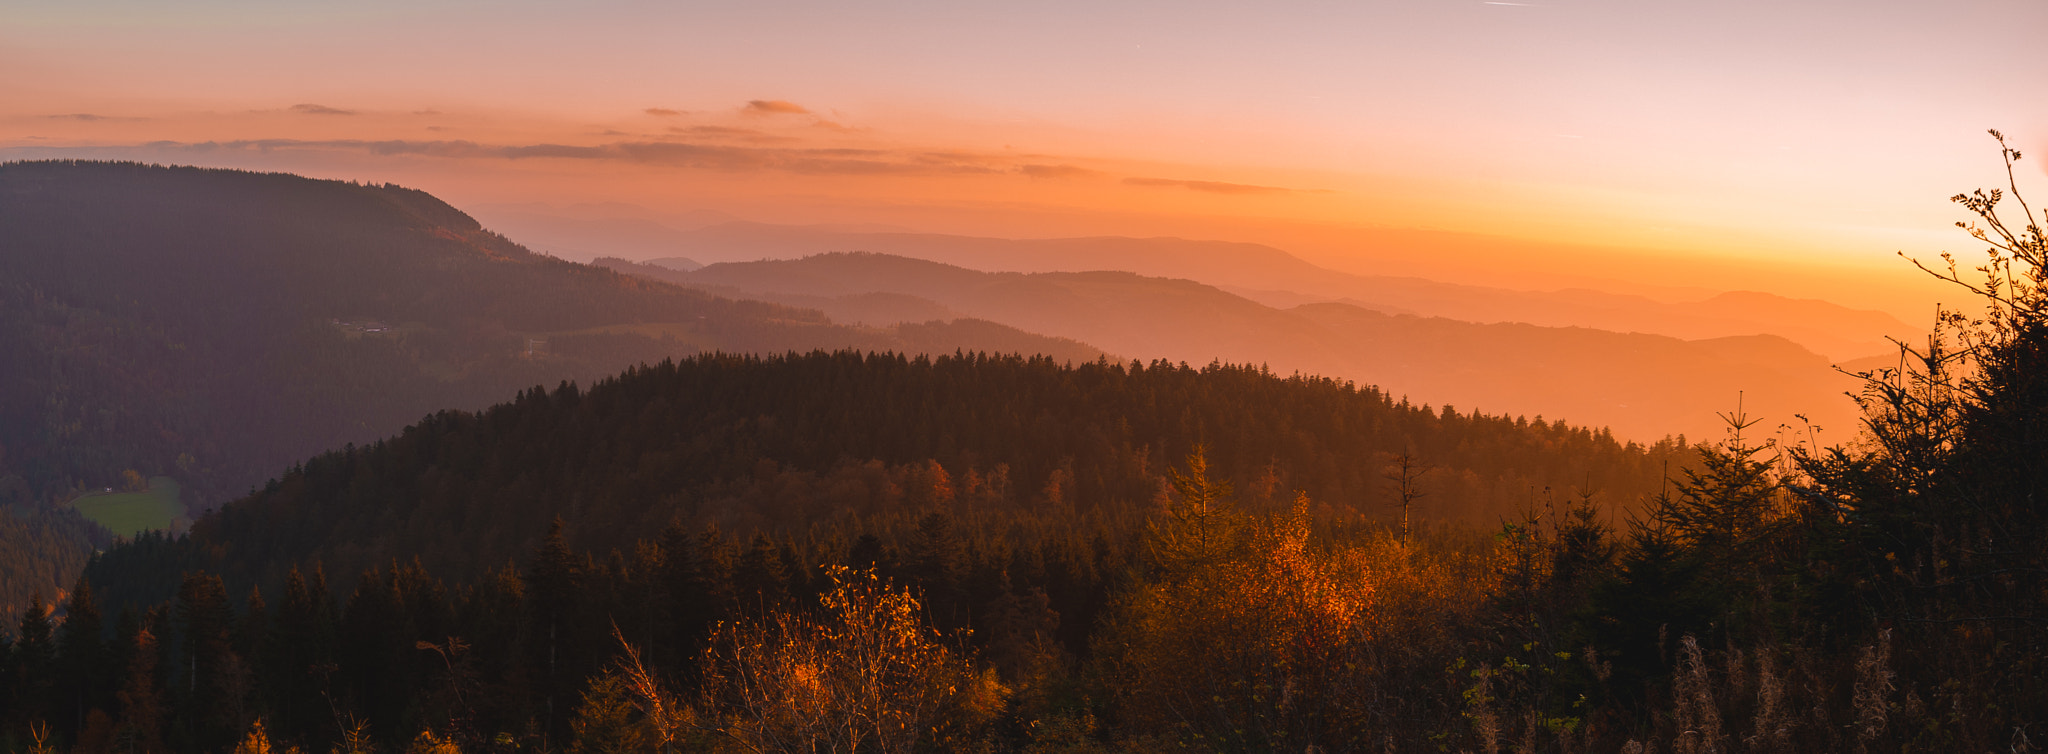 Sony a7 II + Tamron 18-270mm F3.5-6.3 Di II PZD sample photo. Sunset panorama - black forest, germany photography